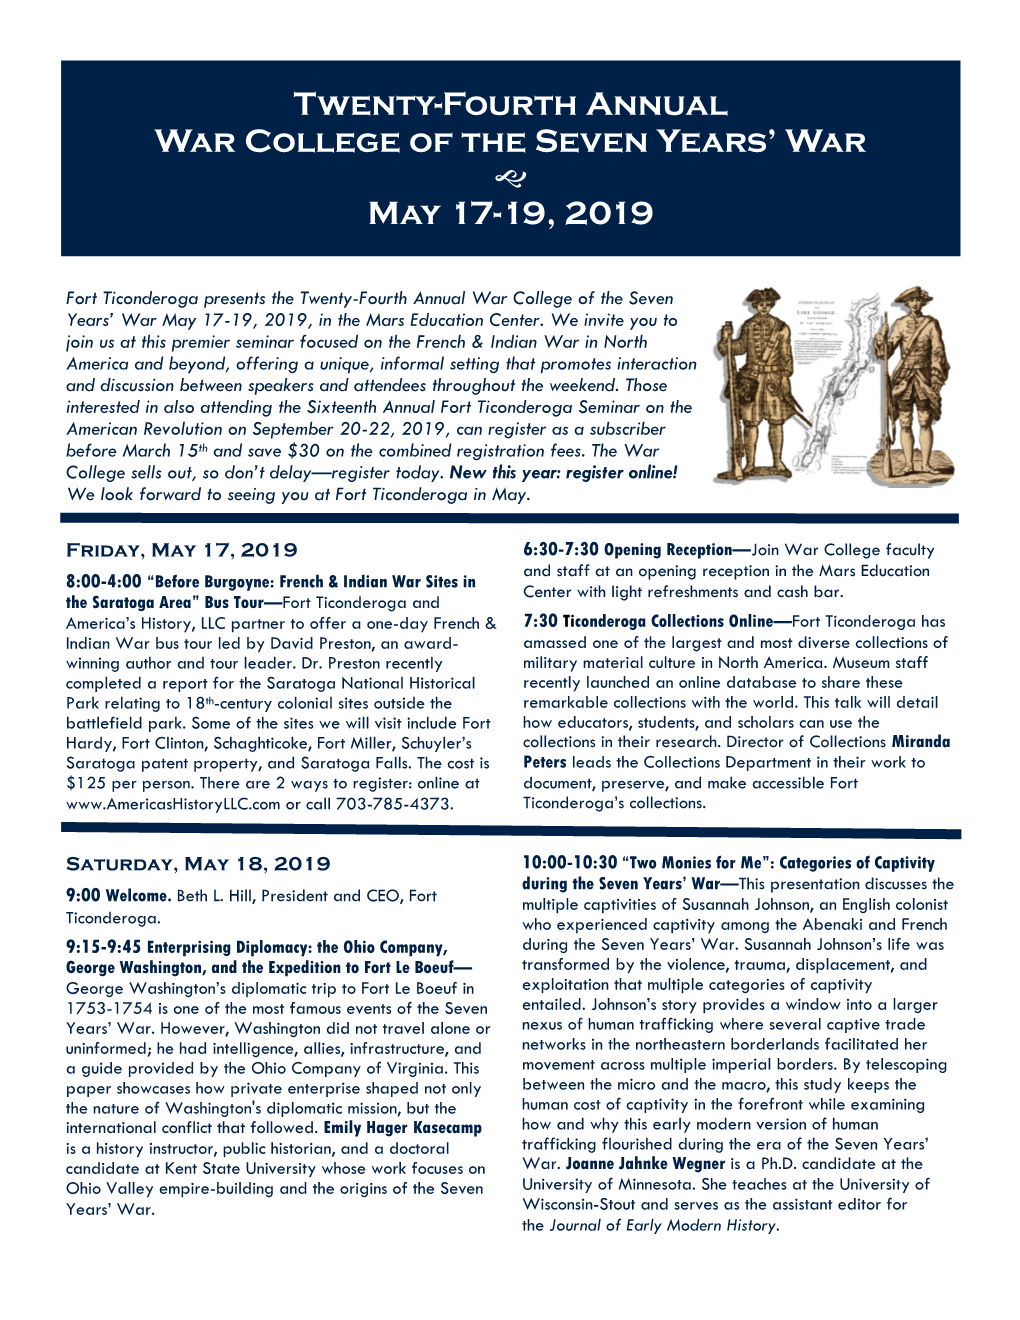 Twenty-Fourth Annual War College of the Seven Years' War May 17-19